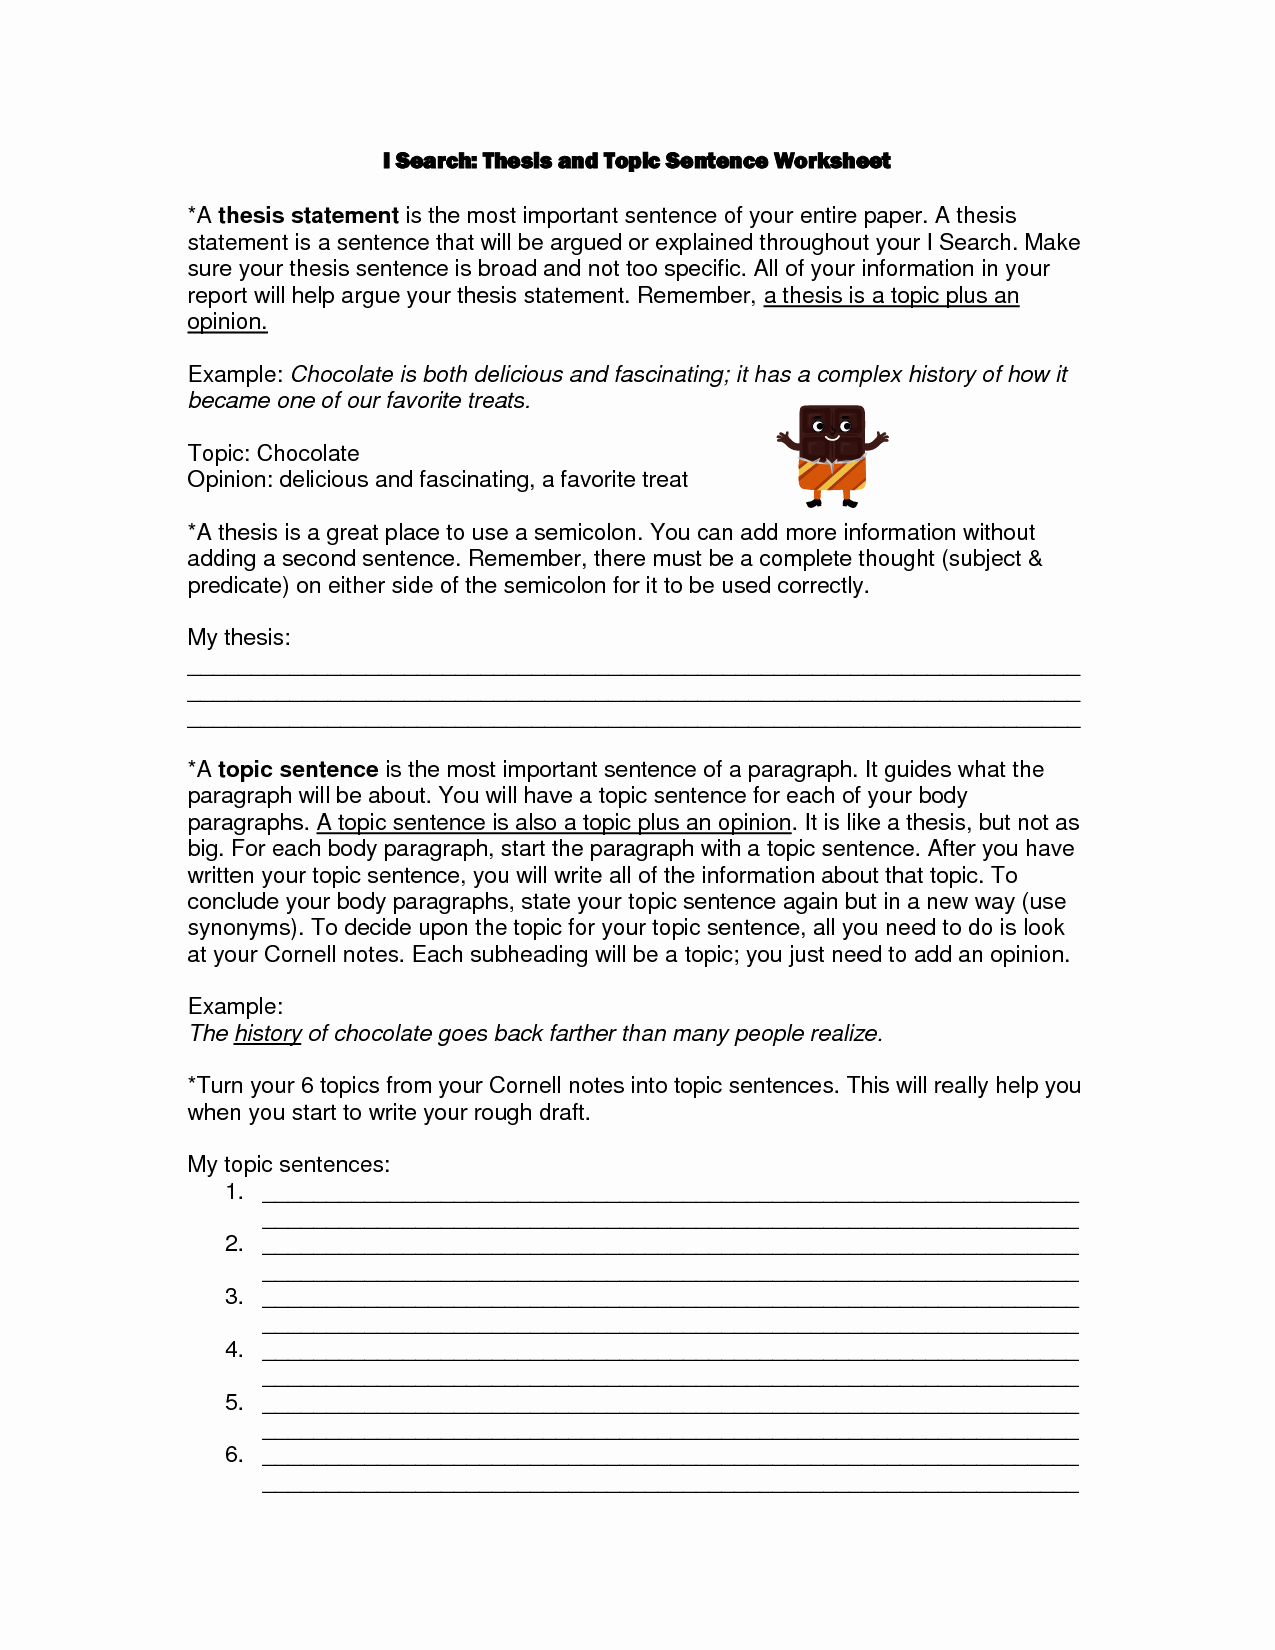 Writing A topic Sentence Worksheet Best Of 11 Best Of topic Sentence Worksheets Writing